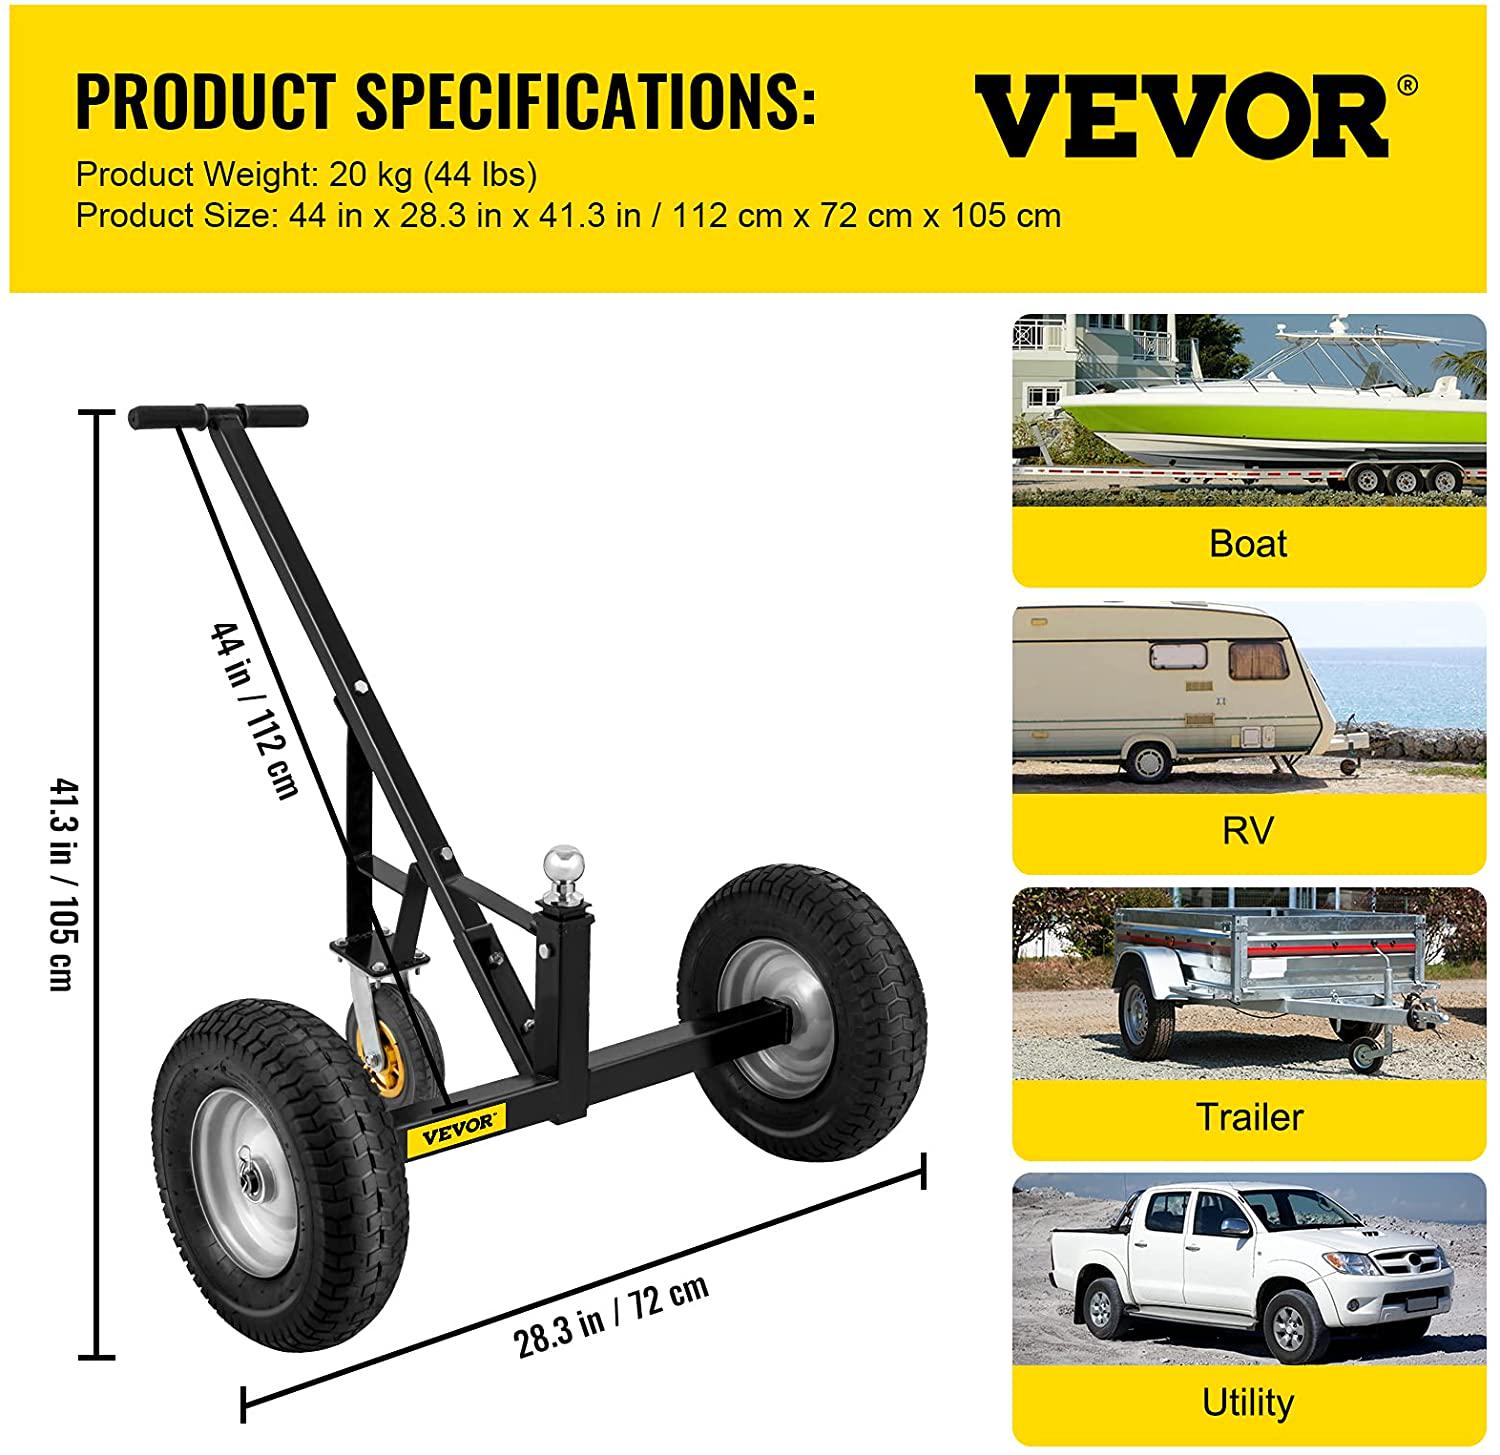 VEVOR Adjustable Trailer Dolly， 800 lbs Capacity， 15.7 -23.6 Adjustable Height， 2 Ball Trailer Mover with 16 Wheels， Heavy-Duty Tow Dolly for Car， RV， Boat